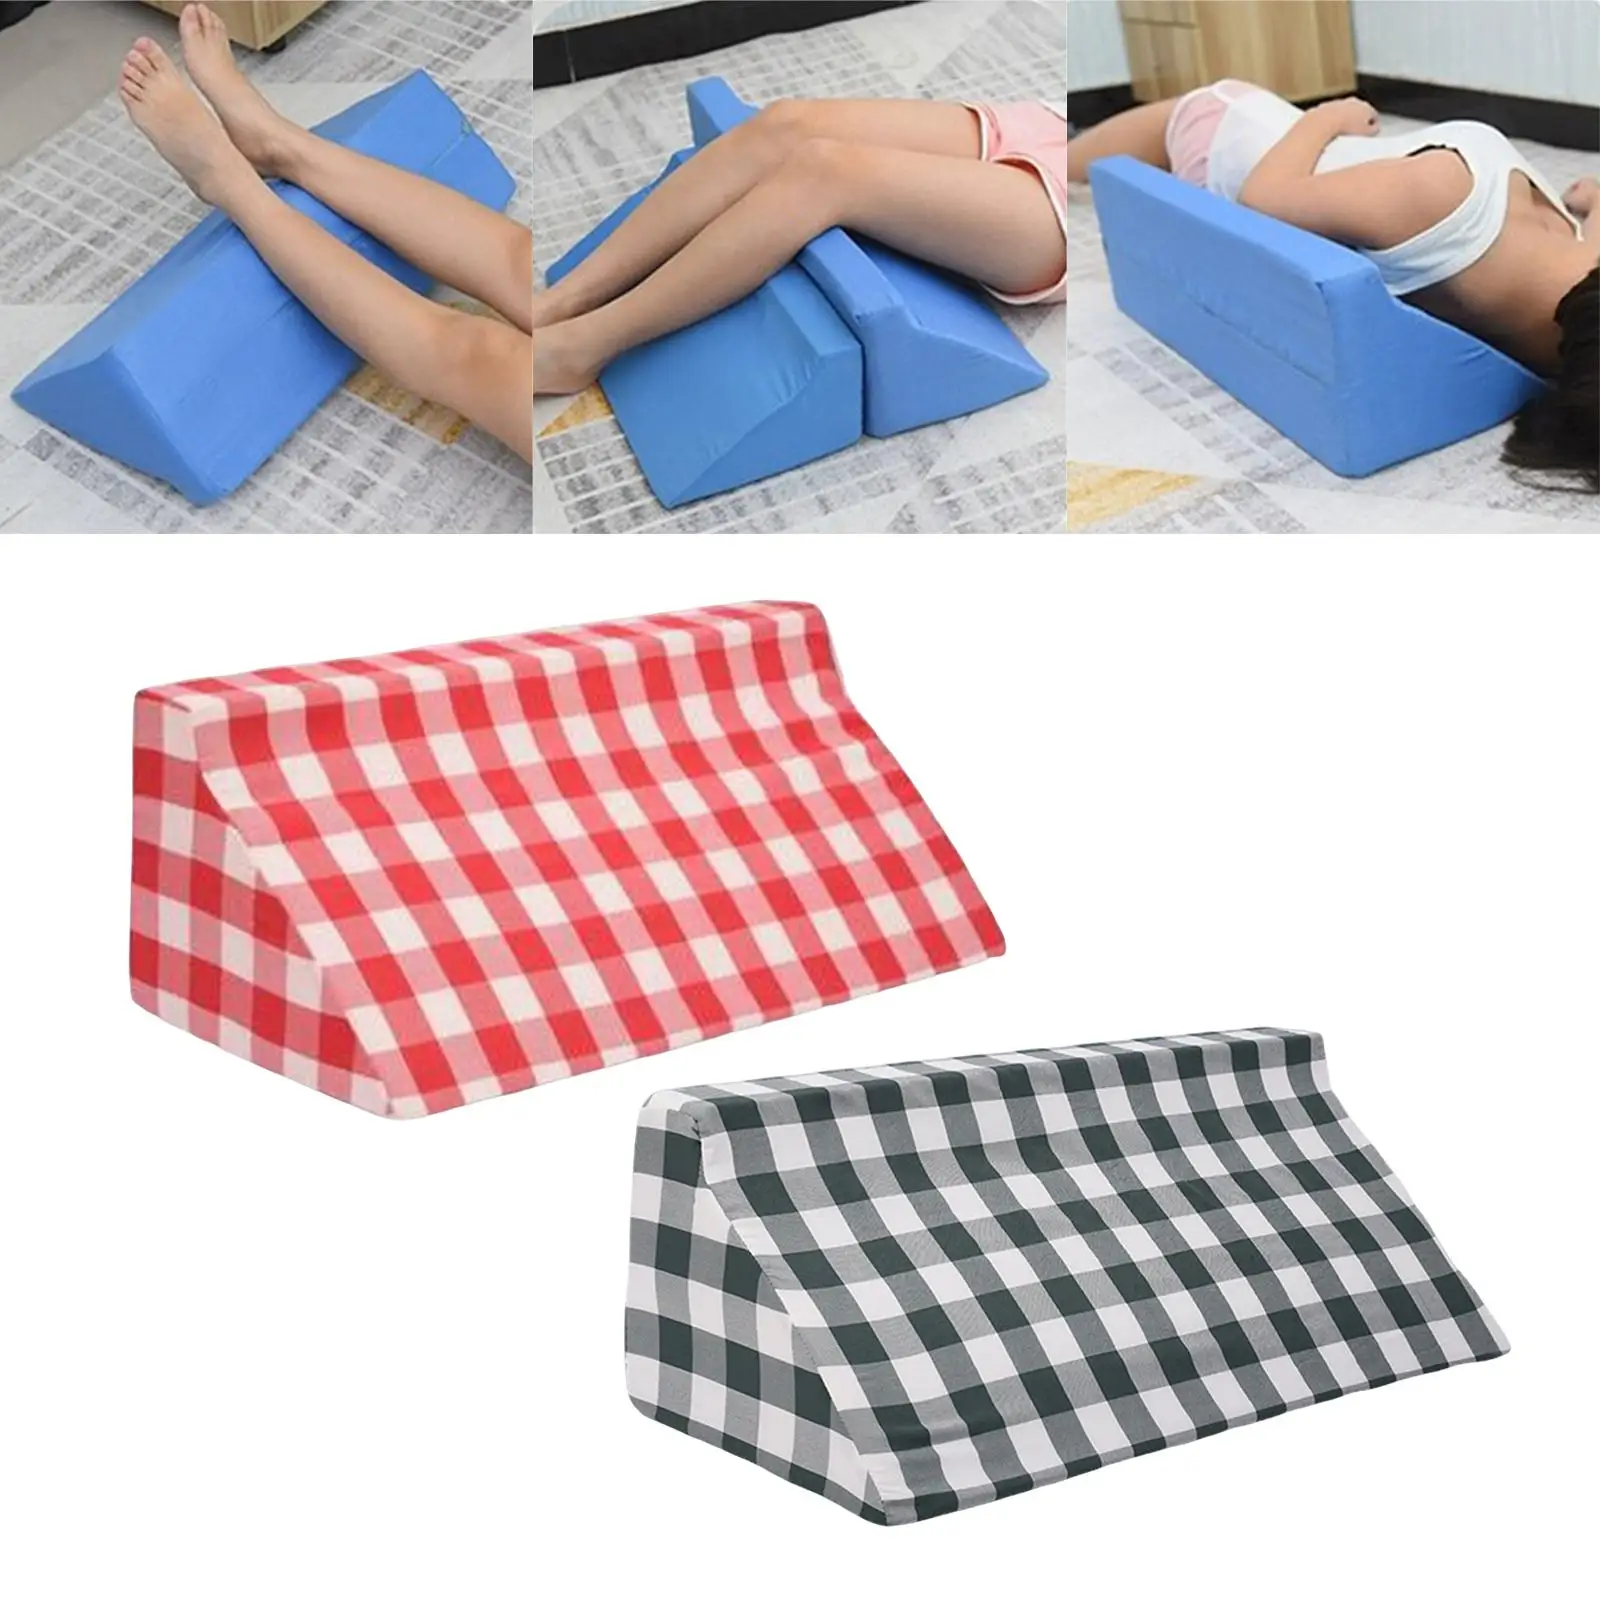 Bed Wedge Pillow Side Sleeping Cushion for Back Washable Slanted for Bedroom